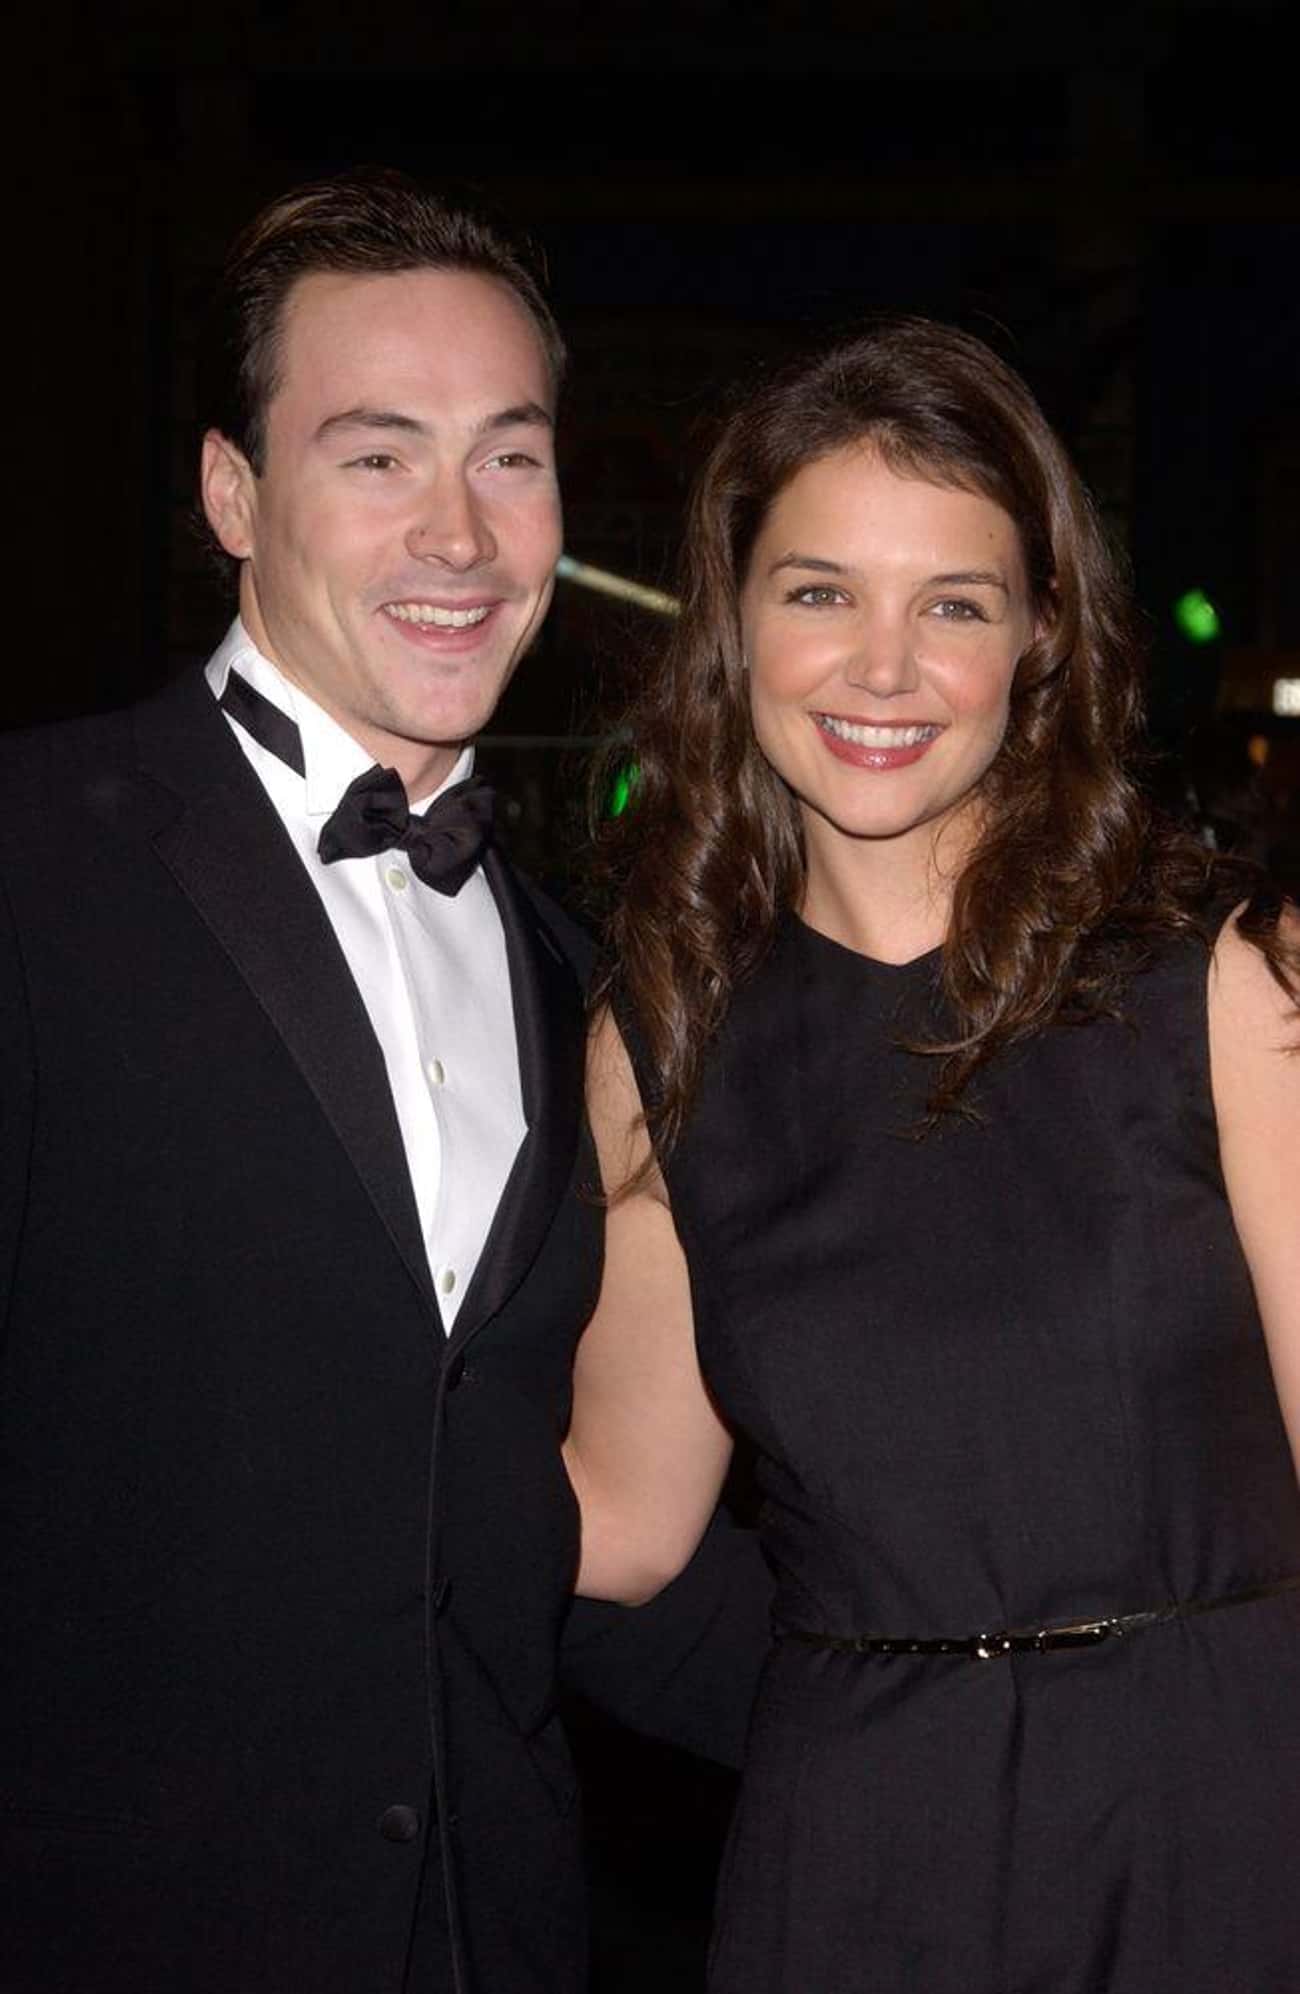 October 2004: In An Interview, While Engaged To Chris Klein, Holmes Said She Always Wanted To Marry Tom Cruise